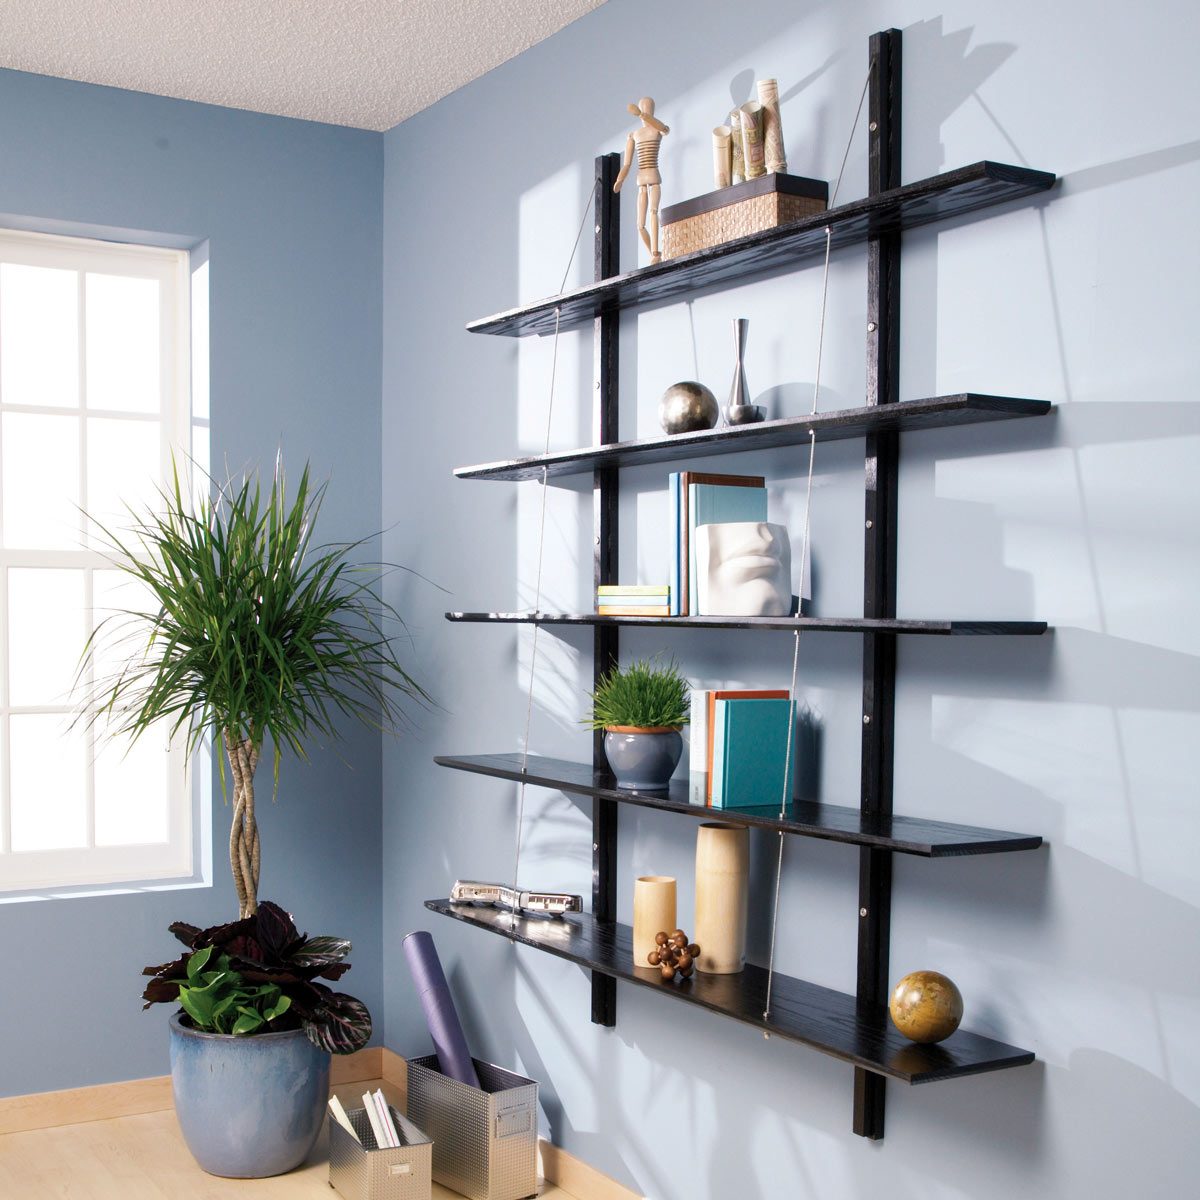 33 Bookcase Projects And Building Tips, How Do You Build A Small Bookcase